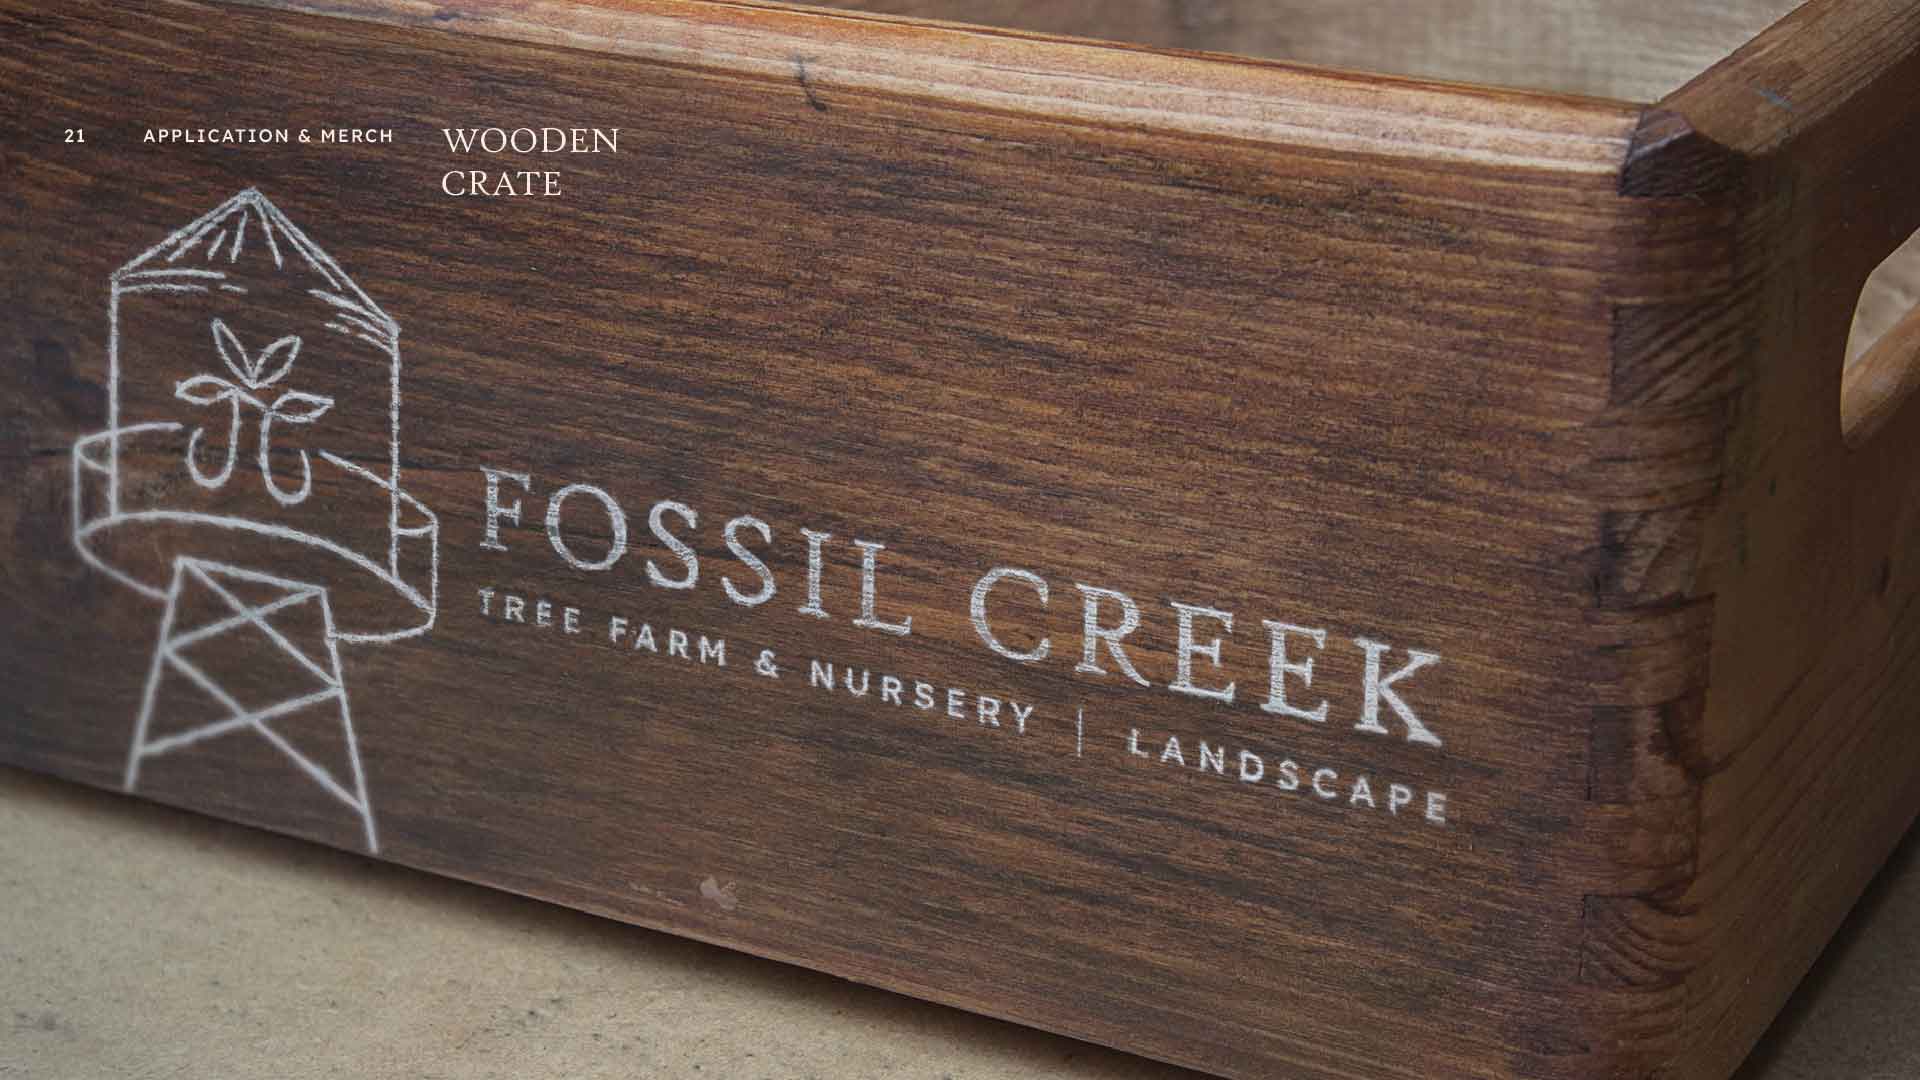 Fossil Creek Tree Farm brand design applied to a wooden apple crate